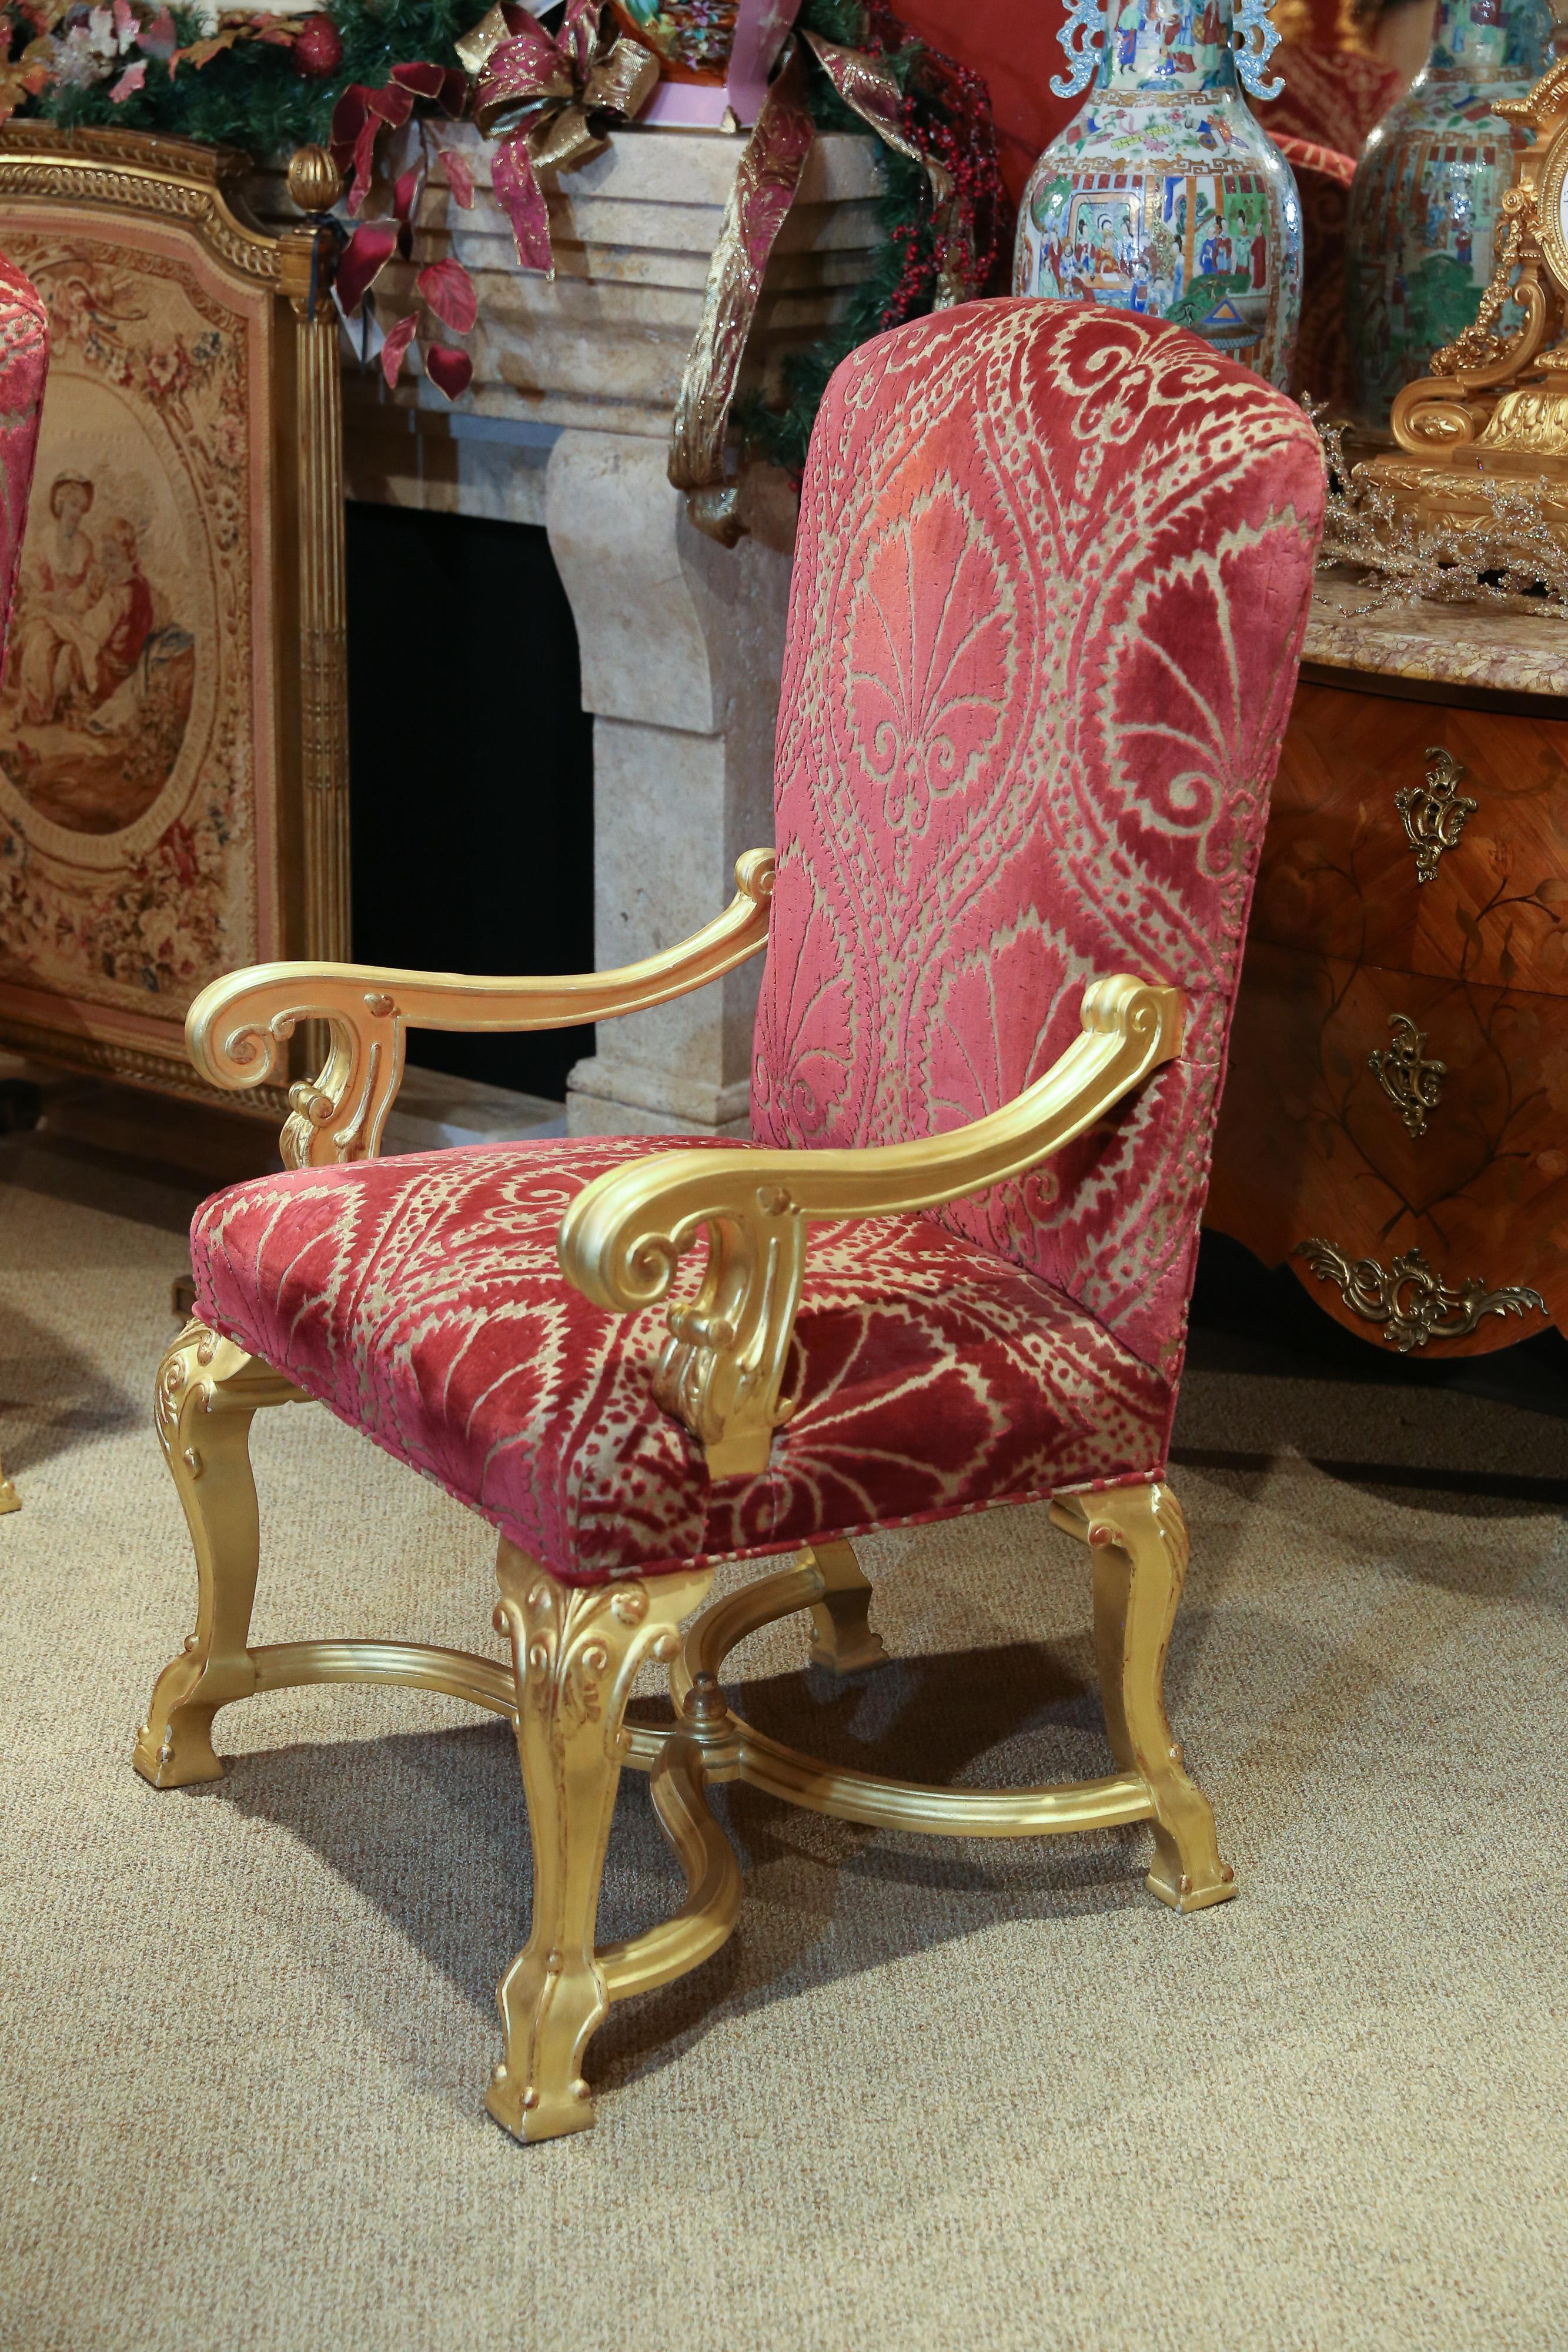 Incredible set of 14 dining chairs in giltwood. Upholstered with Clarence
house cut velvet fabric.